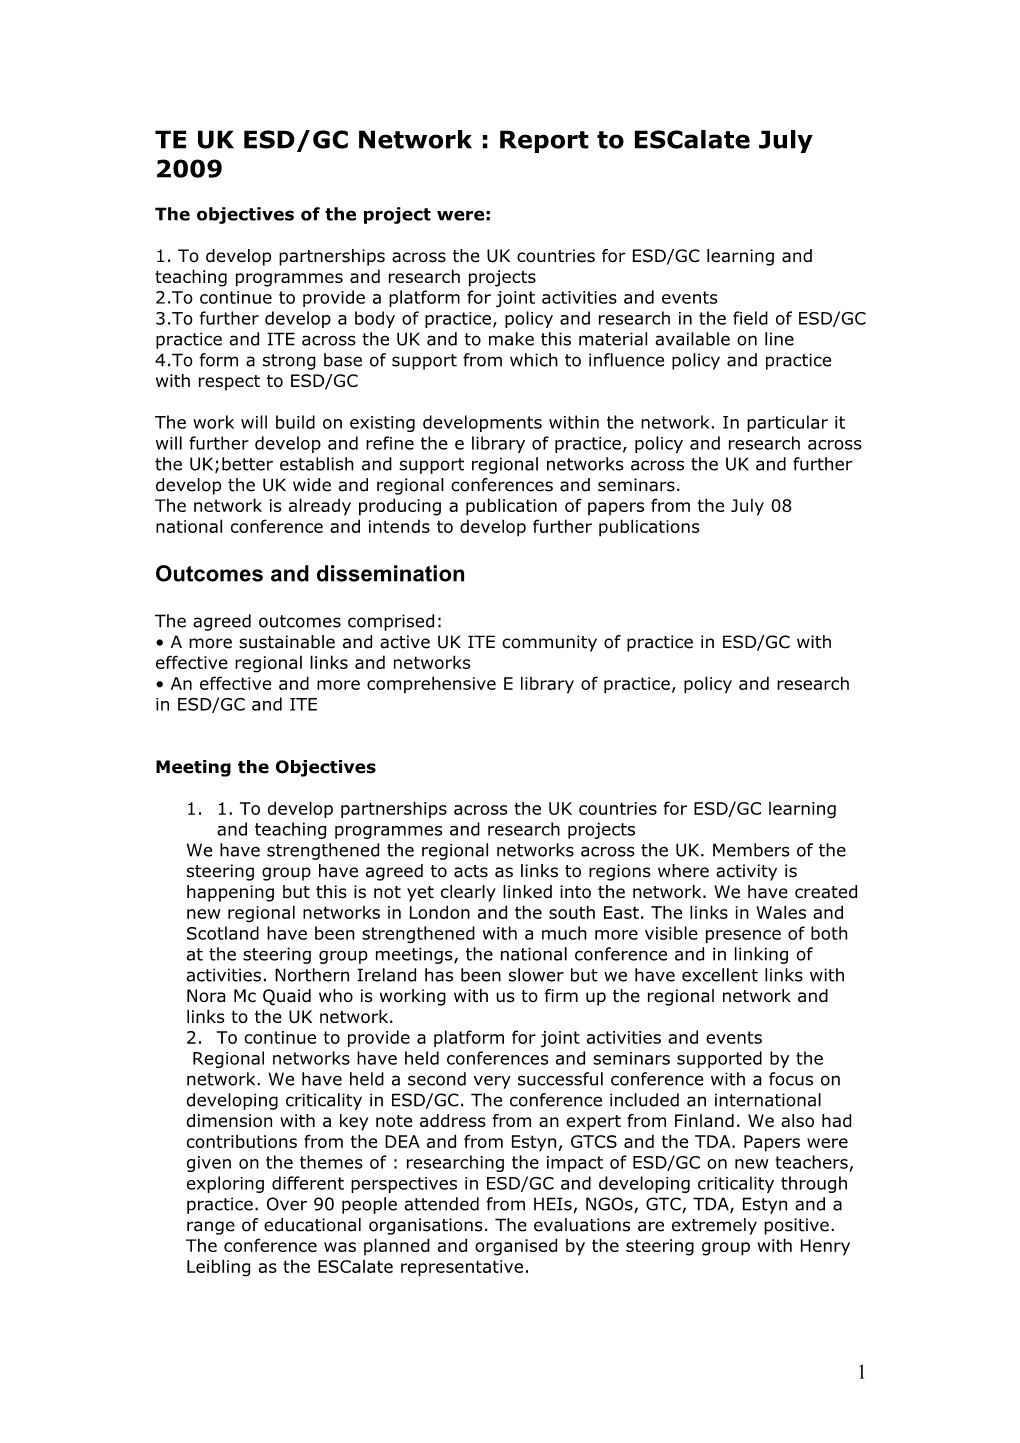 TE UK ESD/GC Network : Report to Escalate July 2009